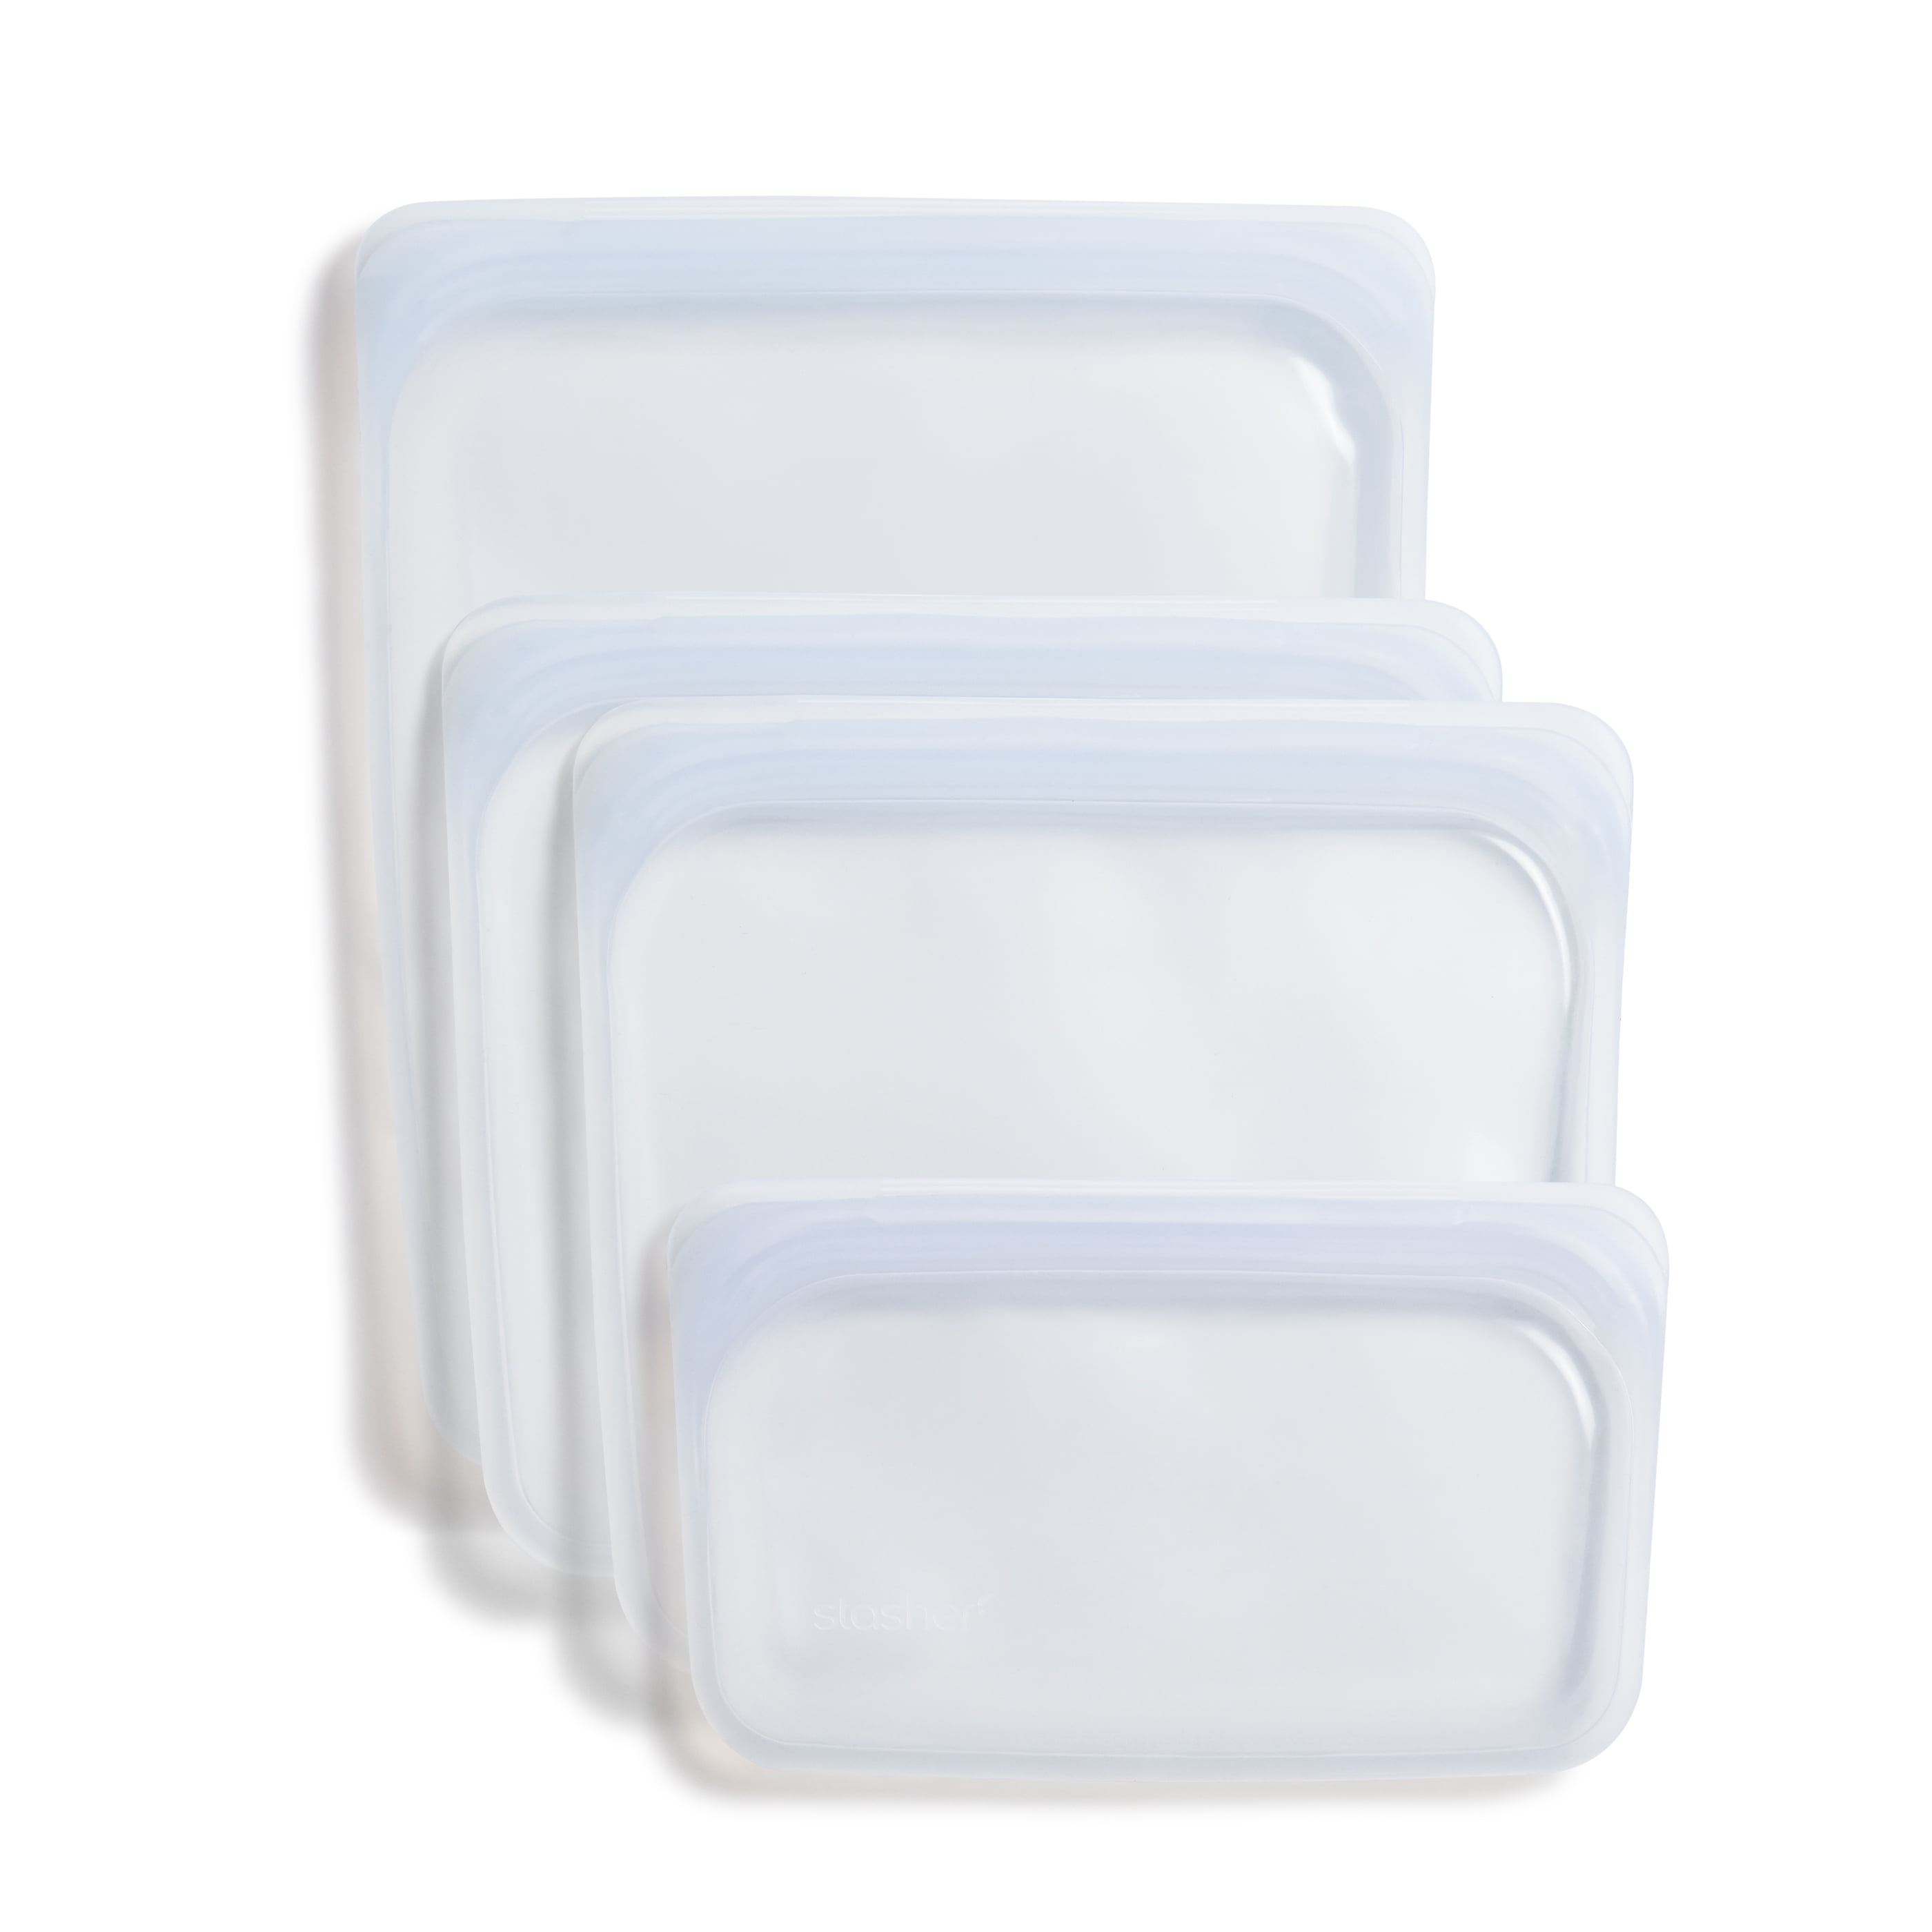 Stasher Starter Kit, Reusable Silicone Bags, Freezer, Dishwasher and Microwave Safe, Clear, 4 Pack - Walmart.com